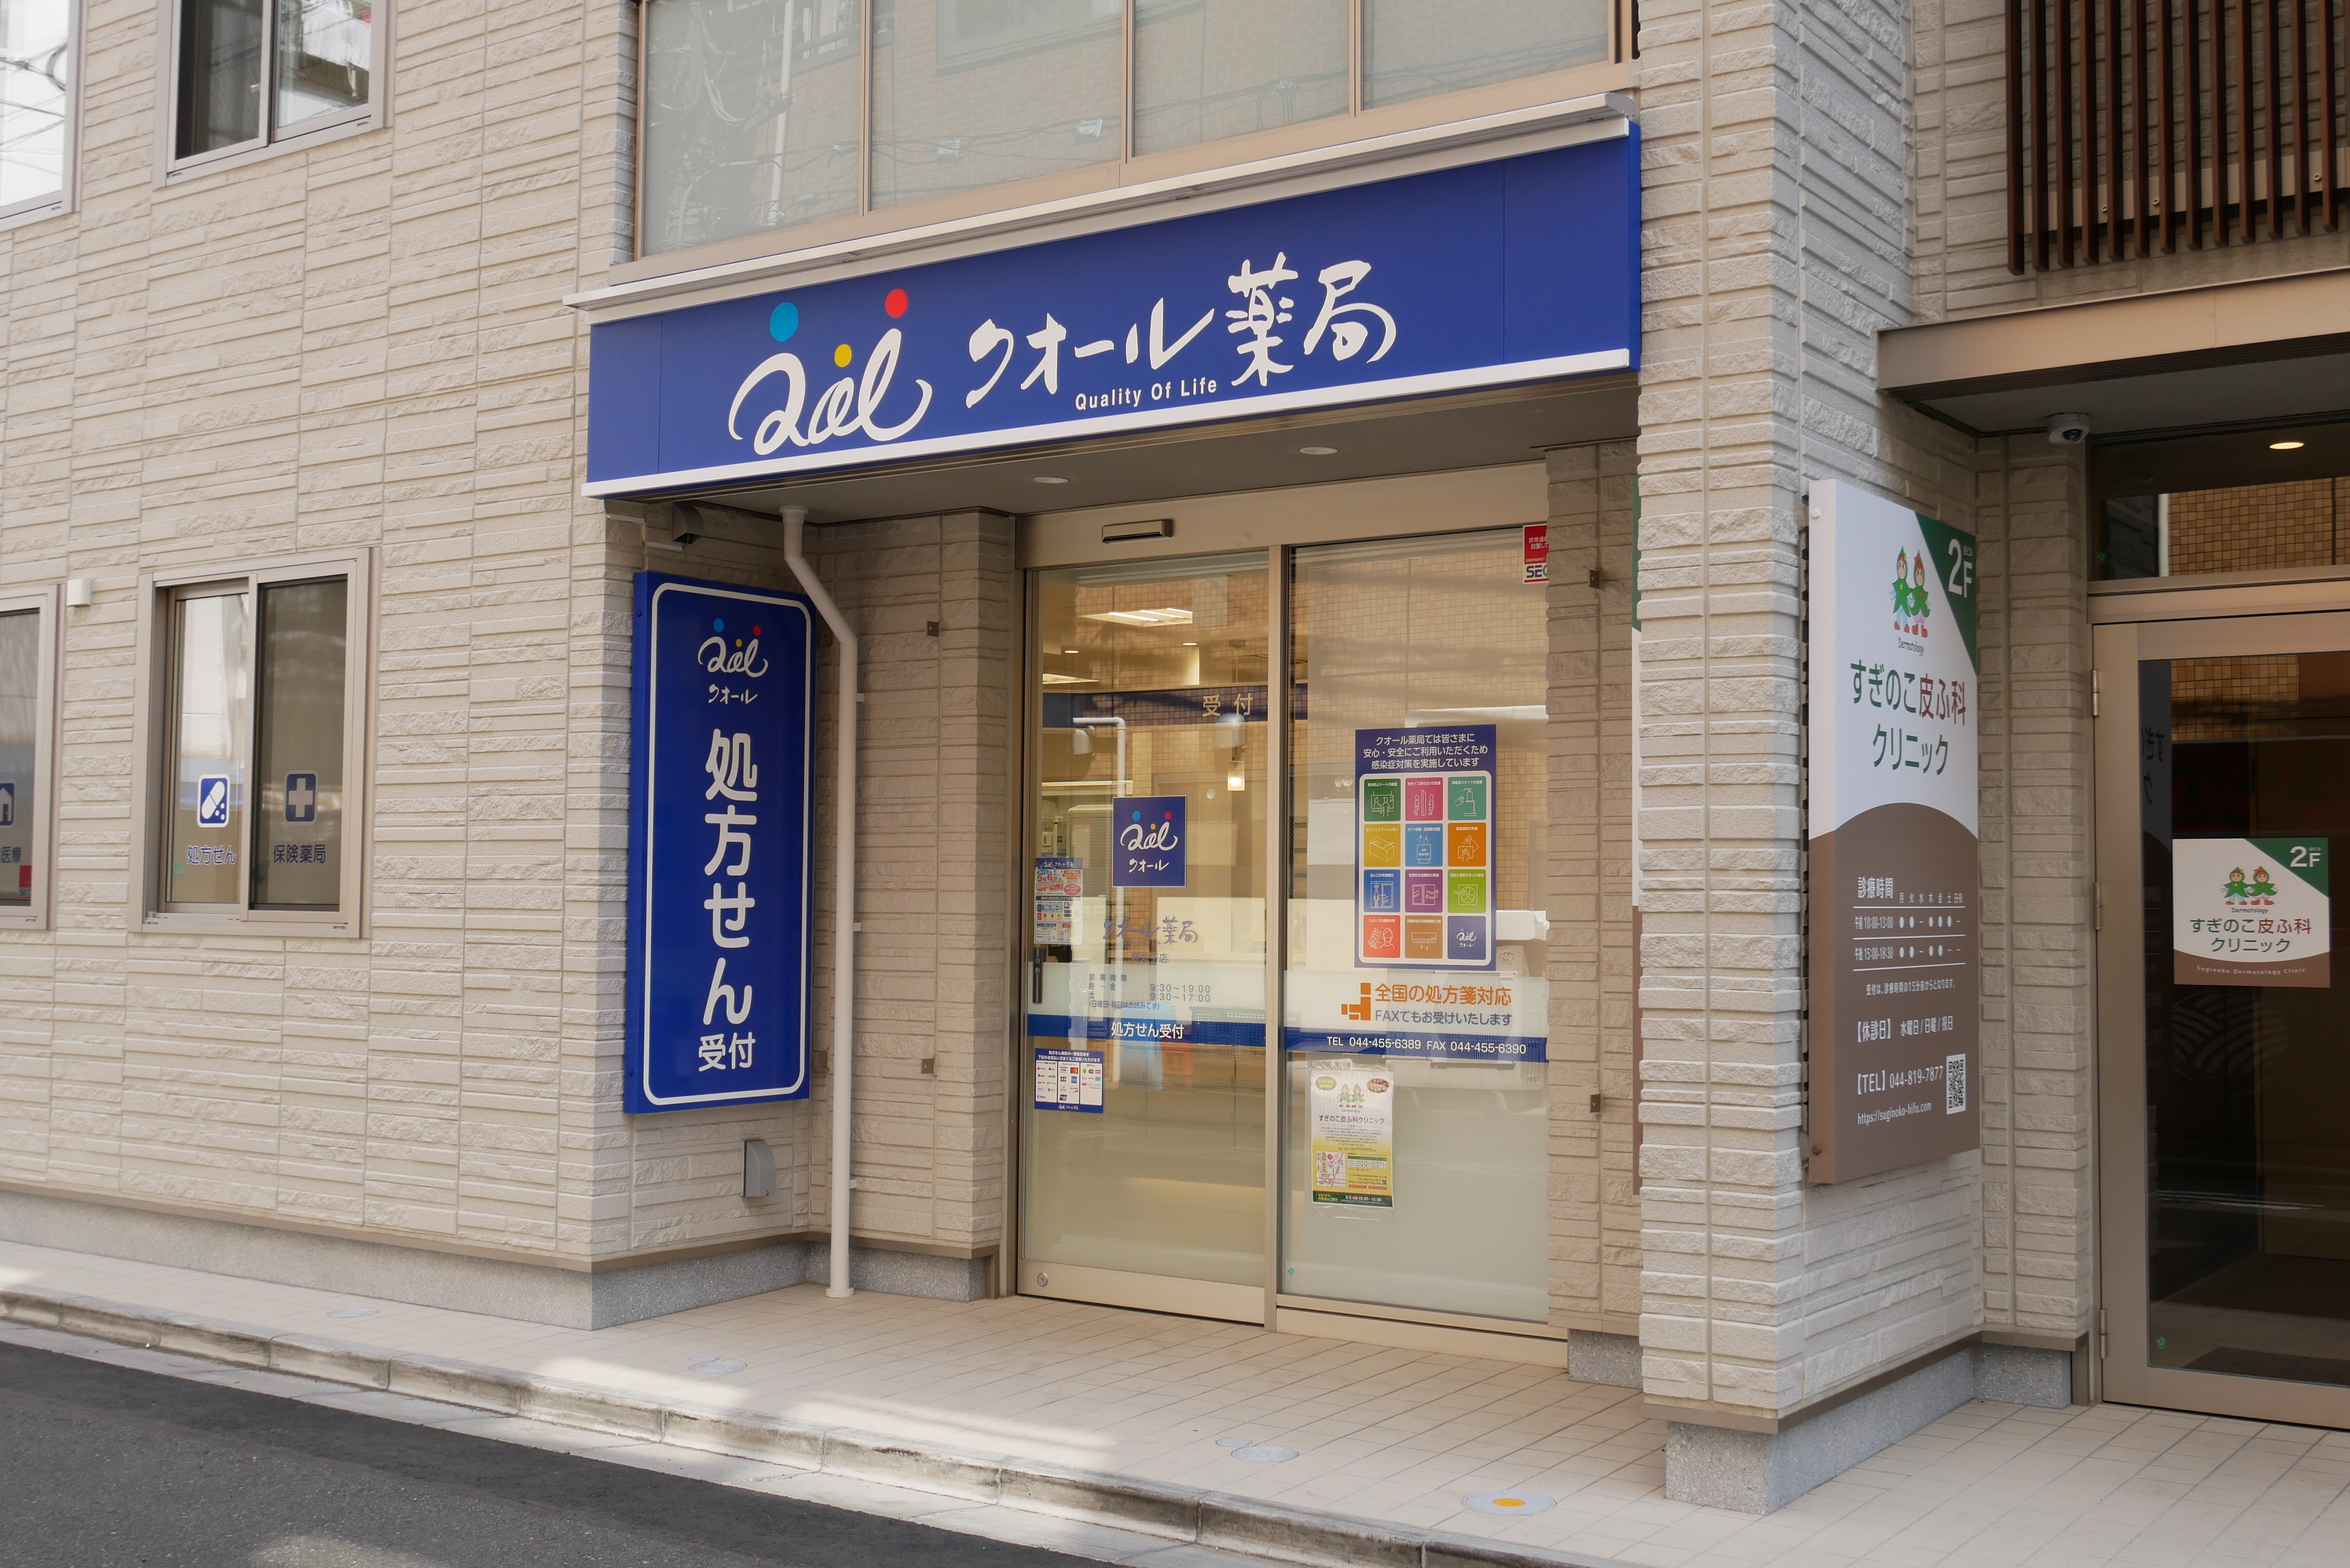 Images クオール薬局新丸子店